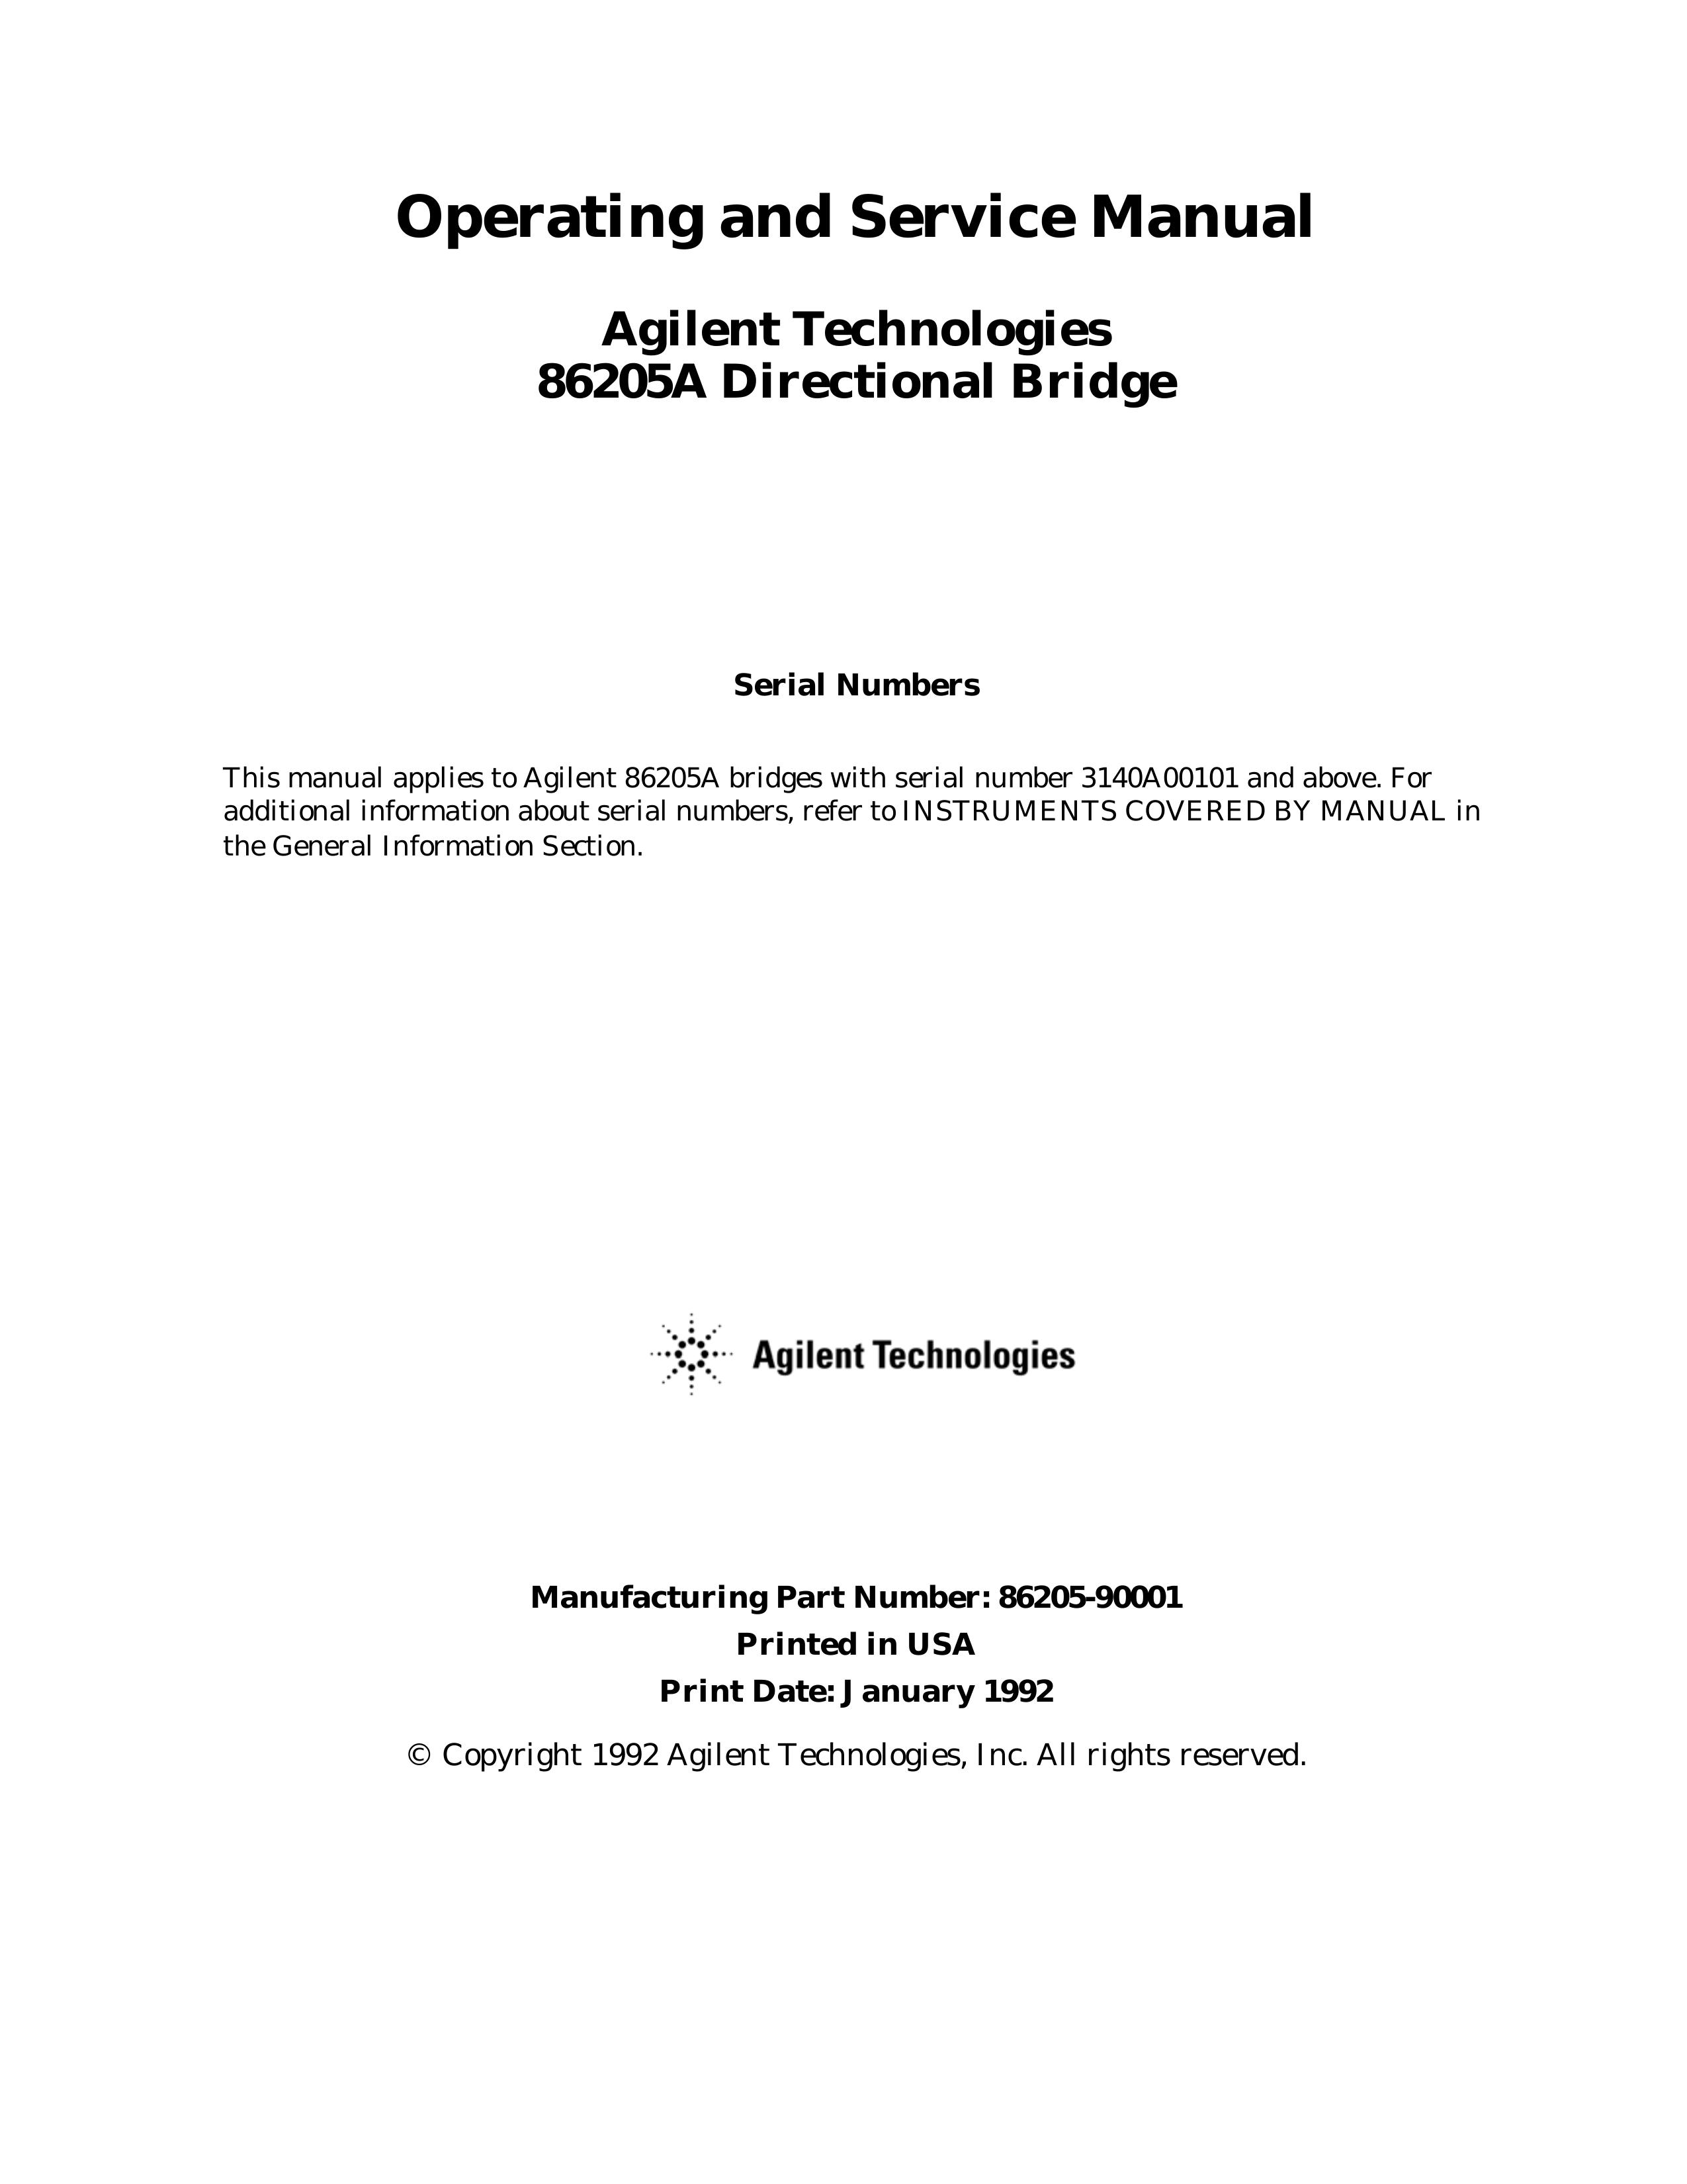 Agilent Technologies 86205A Light Therapy Device User Manual